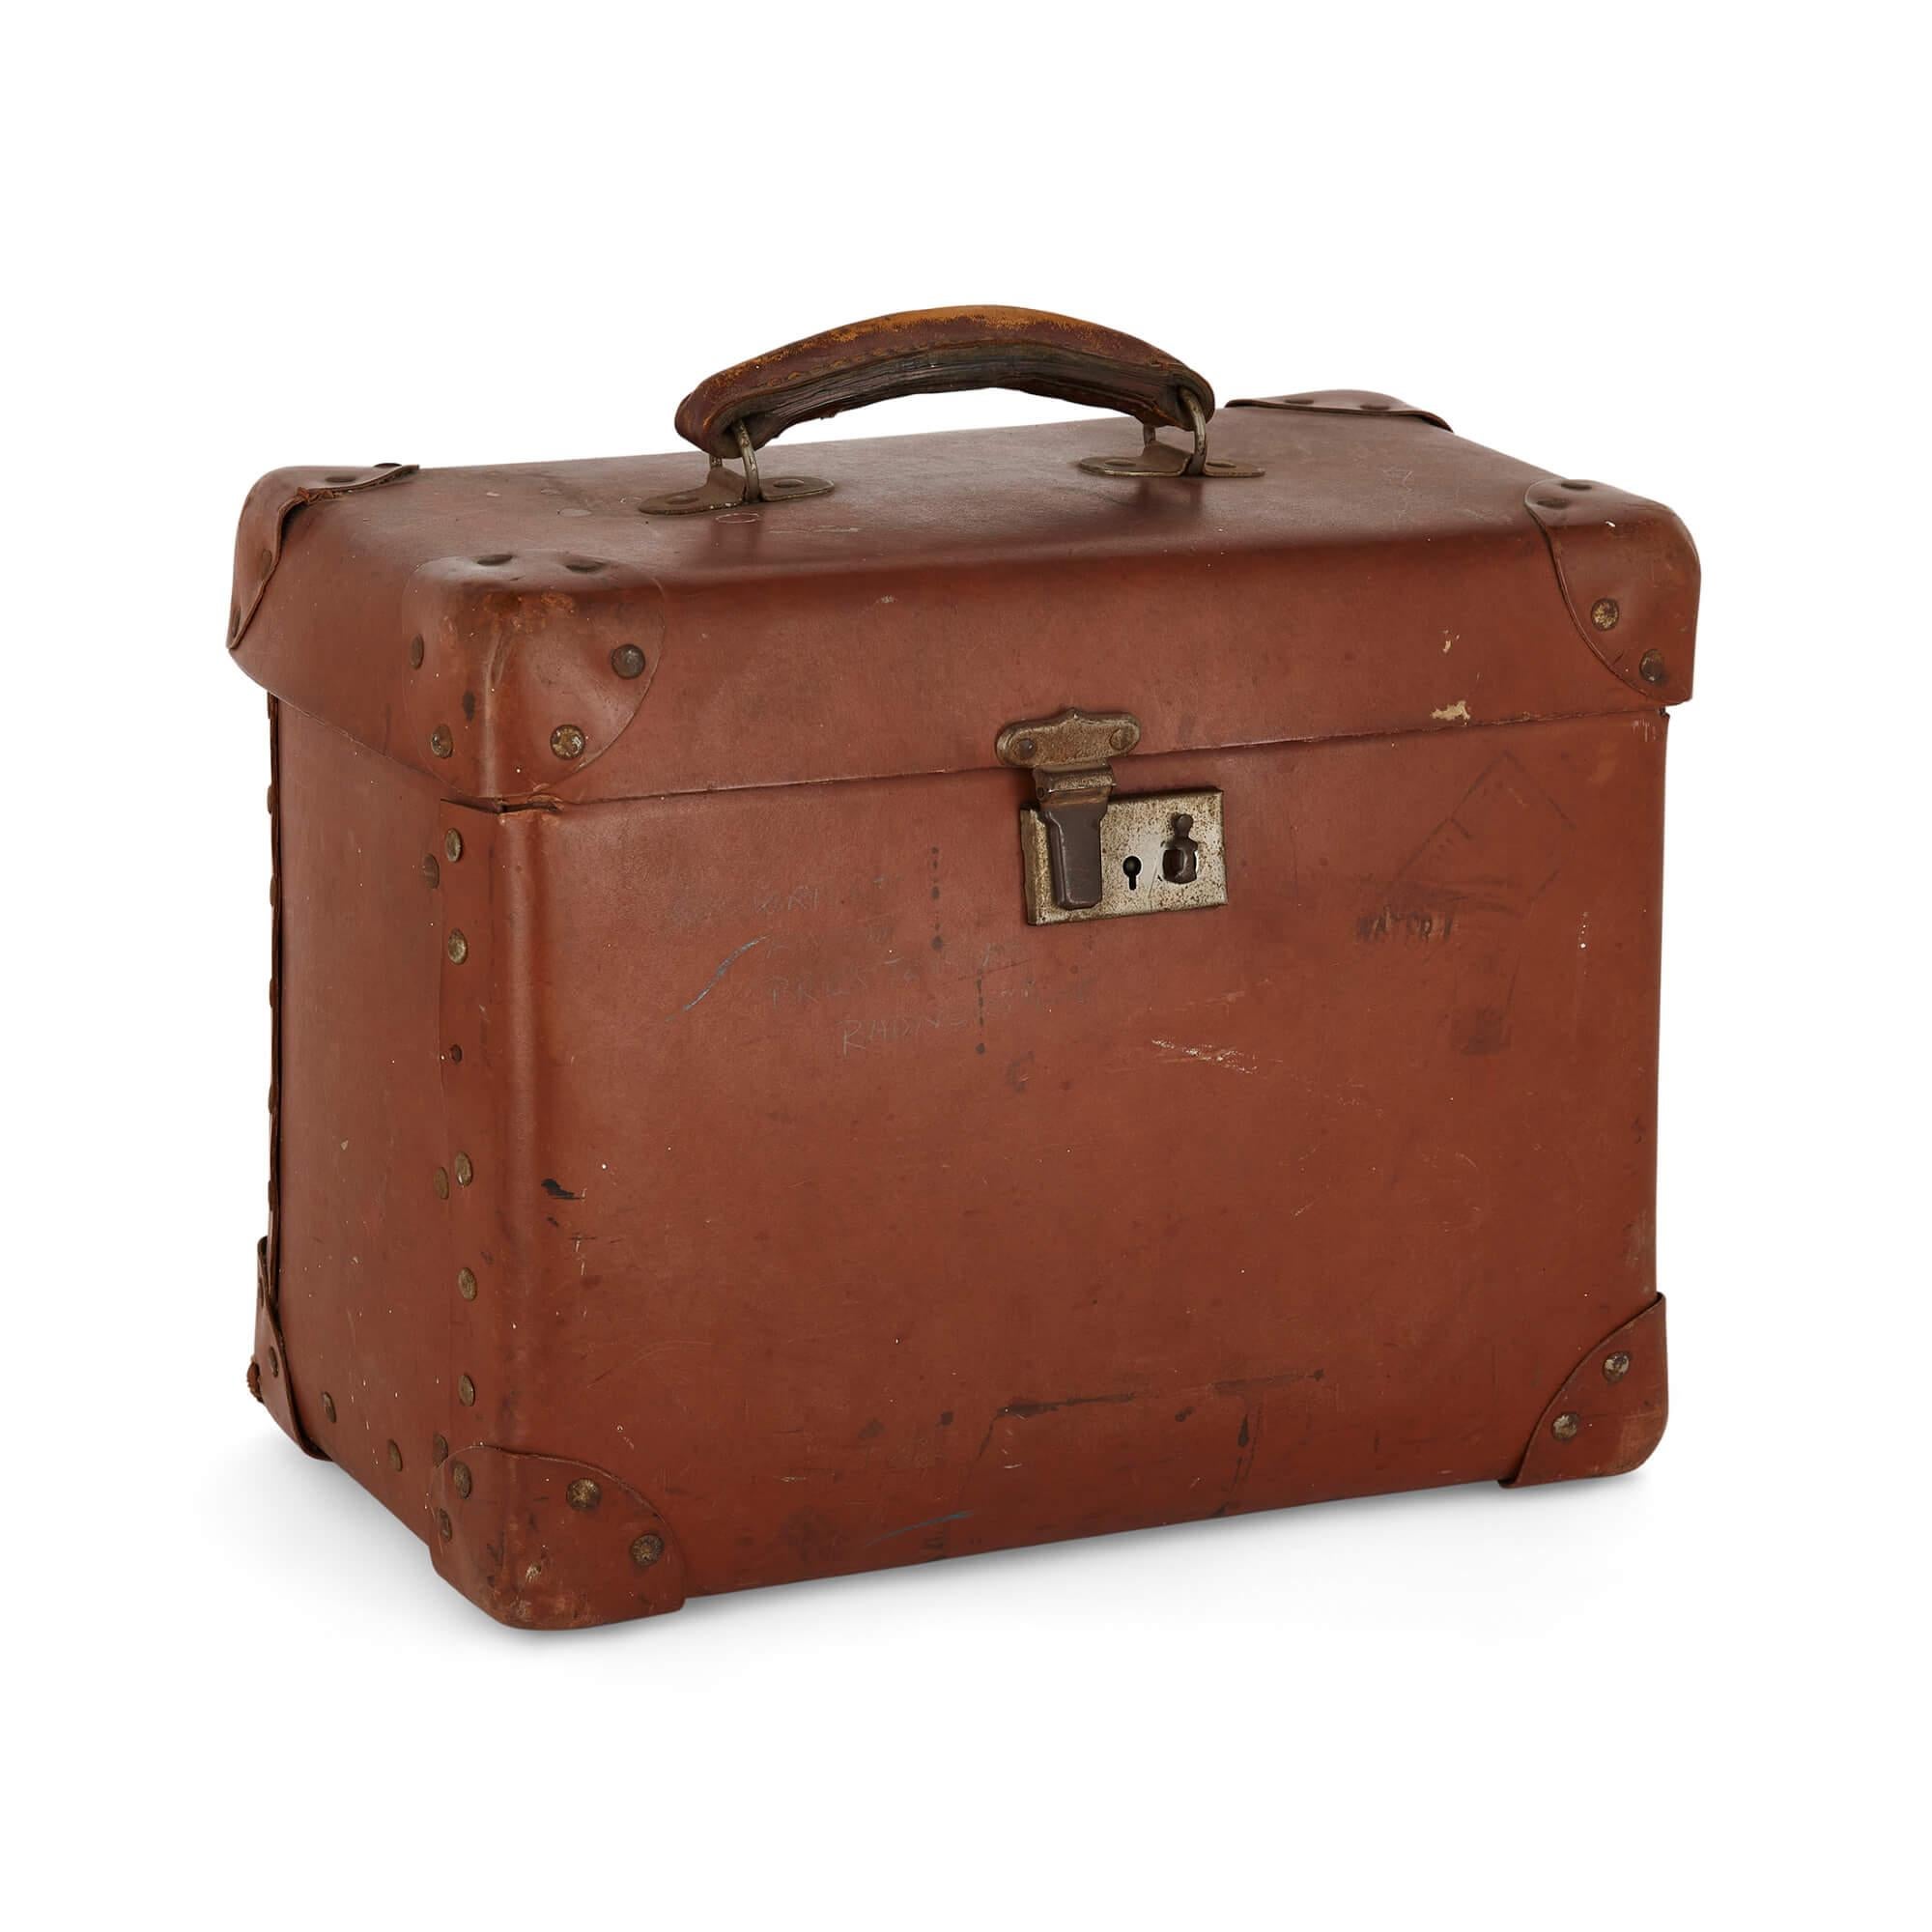 Vintage travel case and top hat by Tress & Co., London.
English, 20th century.
Measures: hat: height 16 cm, width 26 cm, depth 31 cm.
case: height 27 cm, width 35 cm, depth 20 cm.

These intriguing objects, a vintage leather travel case and a